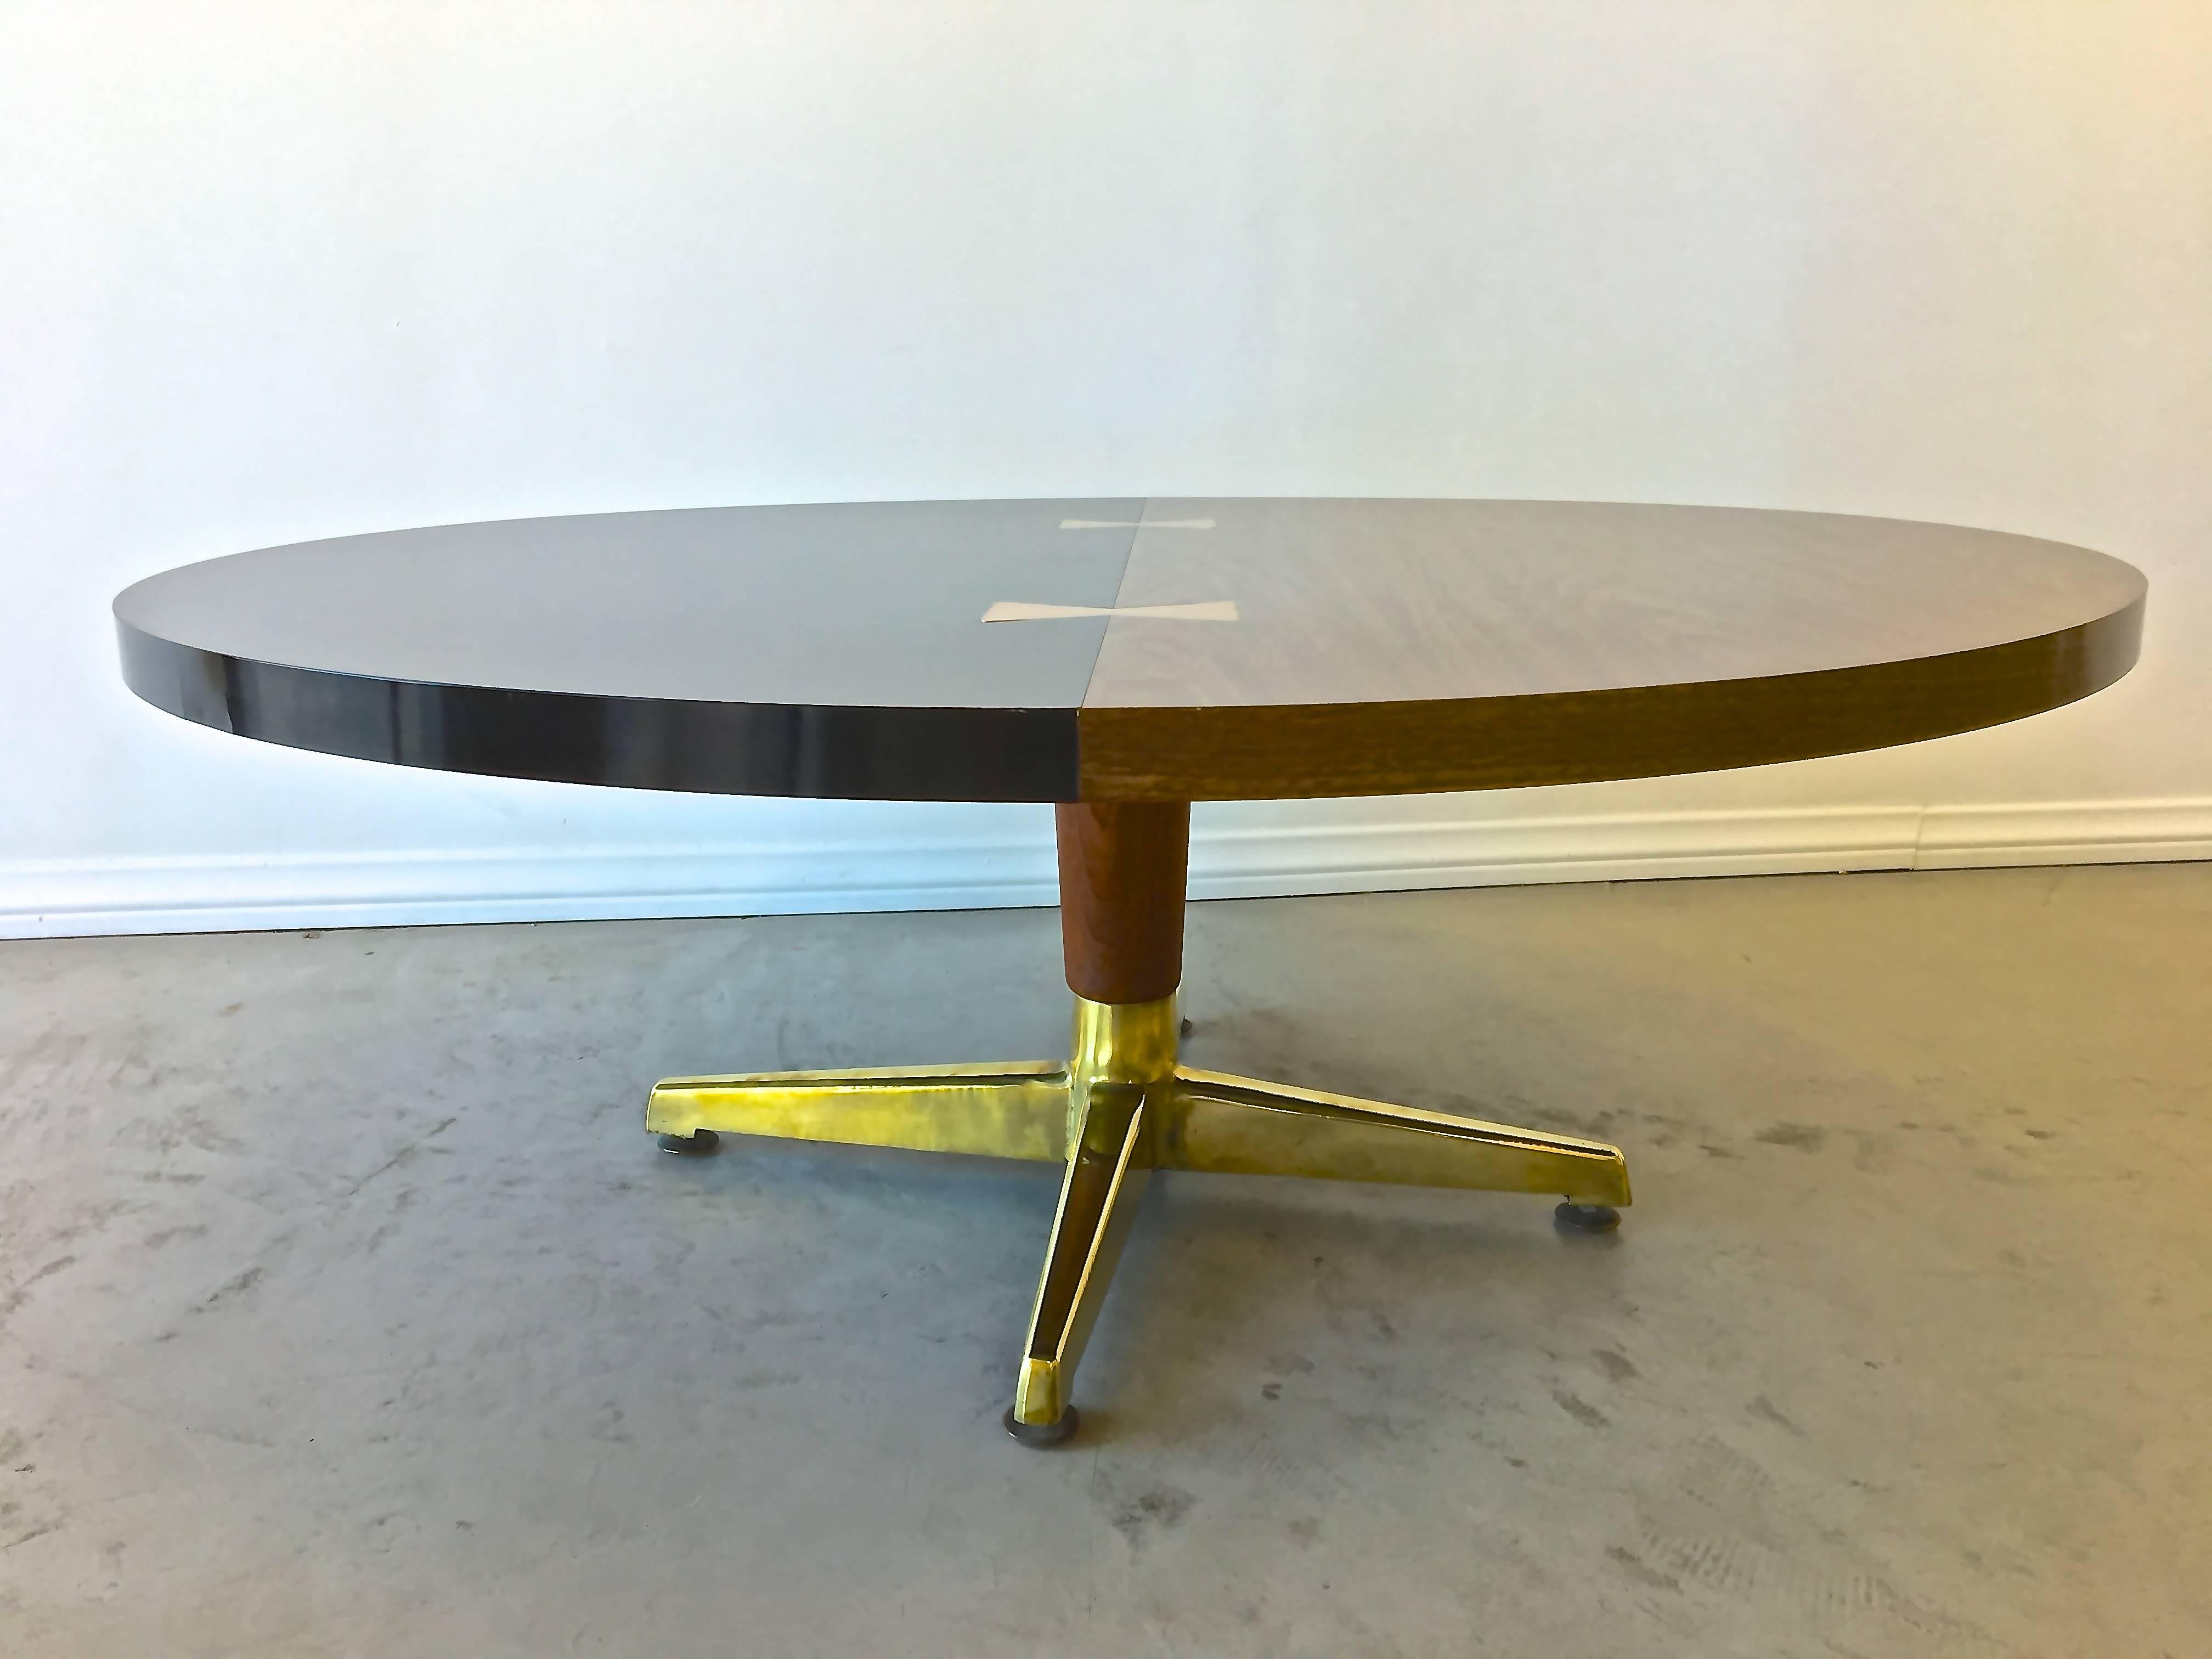 Brass inlaid "bow ties" dress up the split laminate top of ebony and faux walnut while giving a wink to the handcrafted hardwood tables prevalent mid-century. Top is supported by a stem of solid real walnut with a splay of four polished